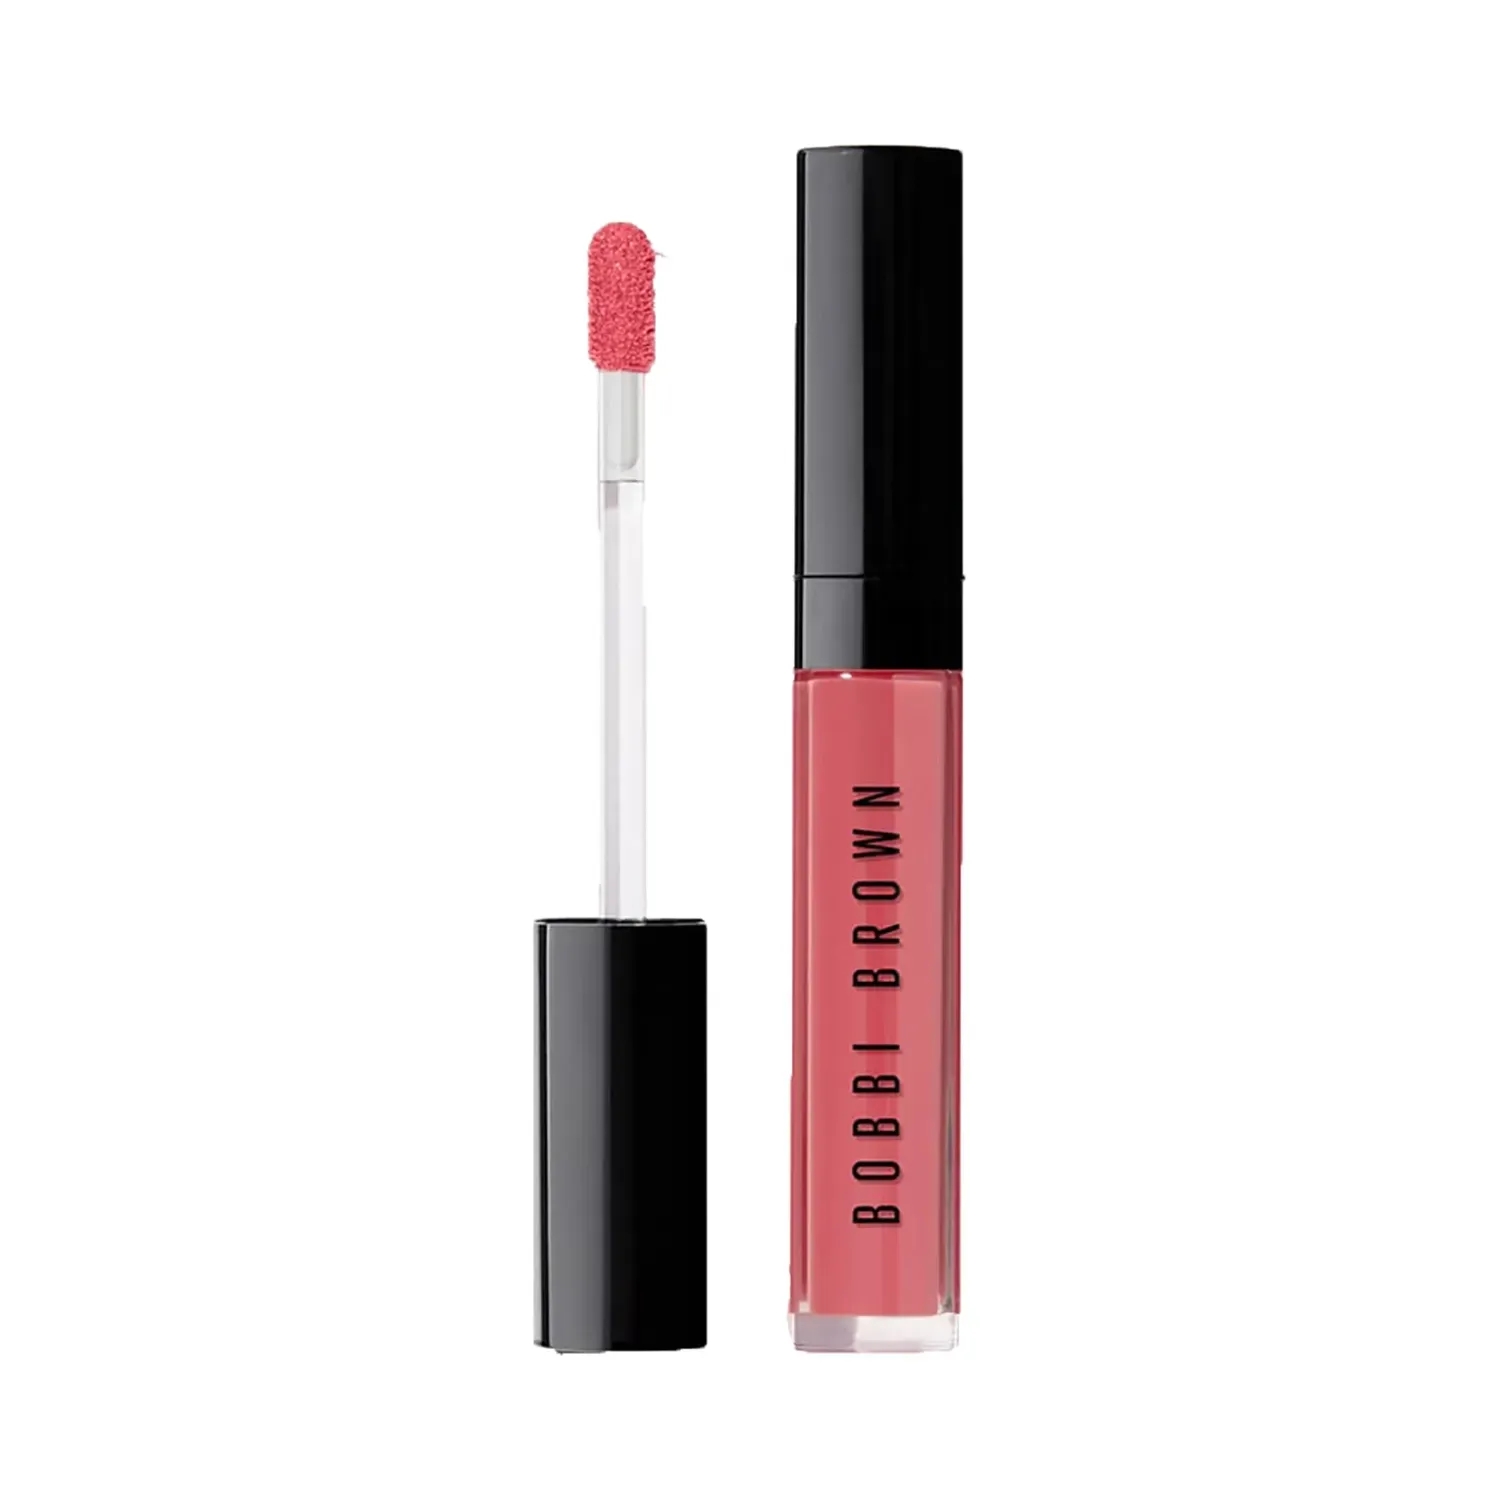 Bobbi Brown Crushed Oil Infused Lip Gloss - Love Letter (6ml)